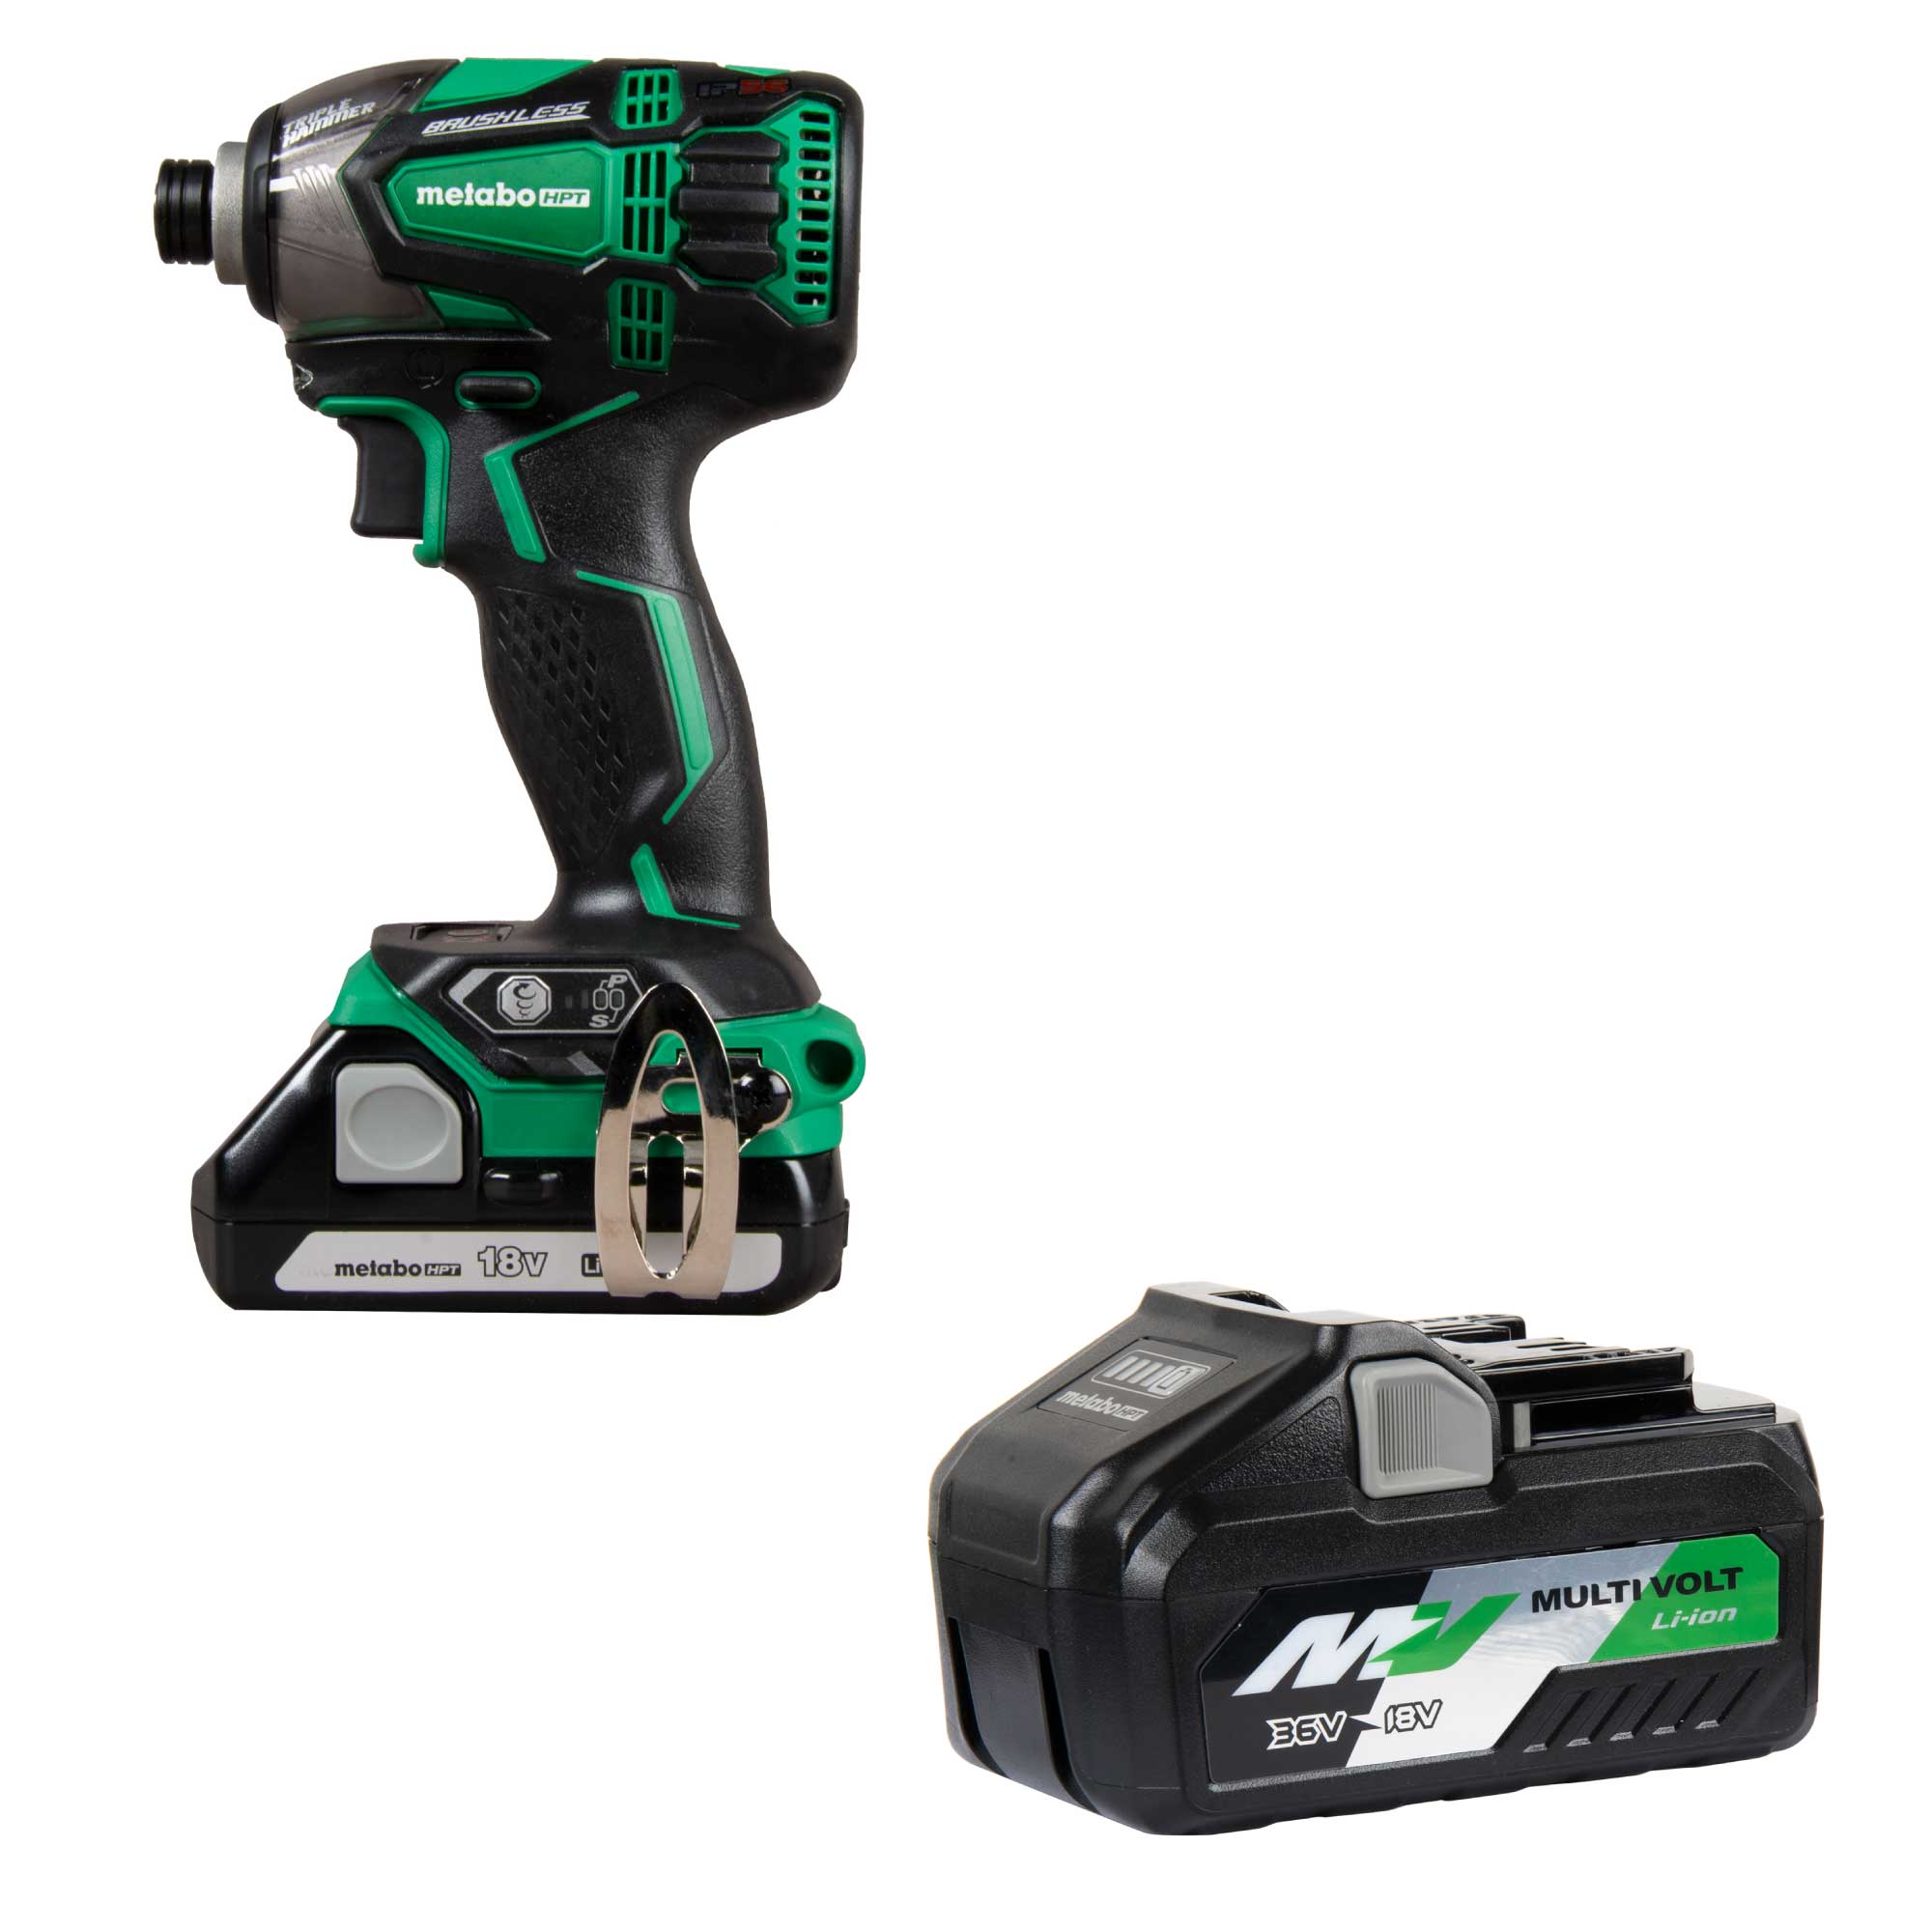 Metabo HPT MultiVolt 18-volt 1/4-in Variable Speed Brushless Cordless Impact Driver (2-batteries included) with MultiVolt 4.0Ah/8.0Ah Power Tool